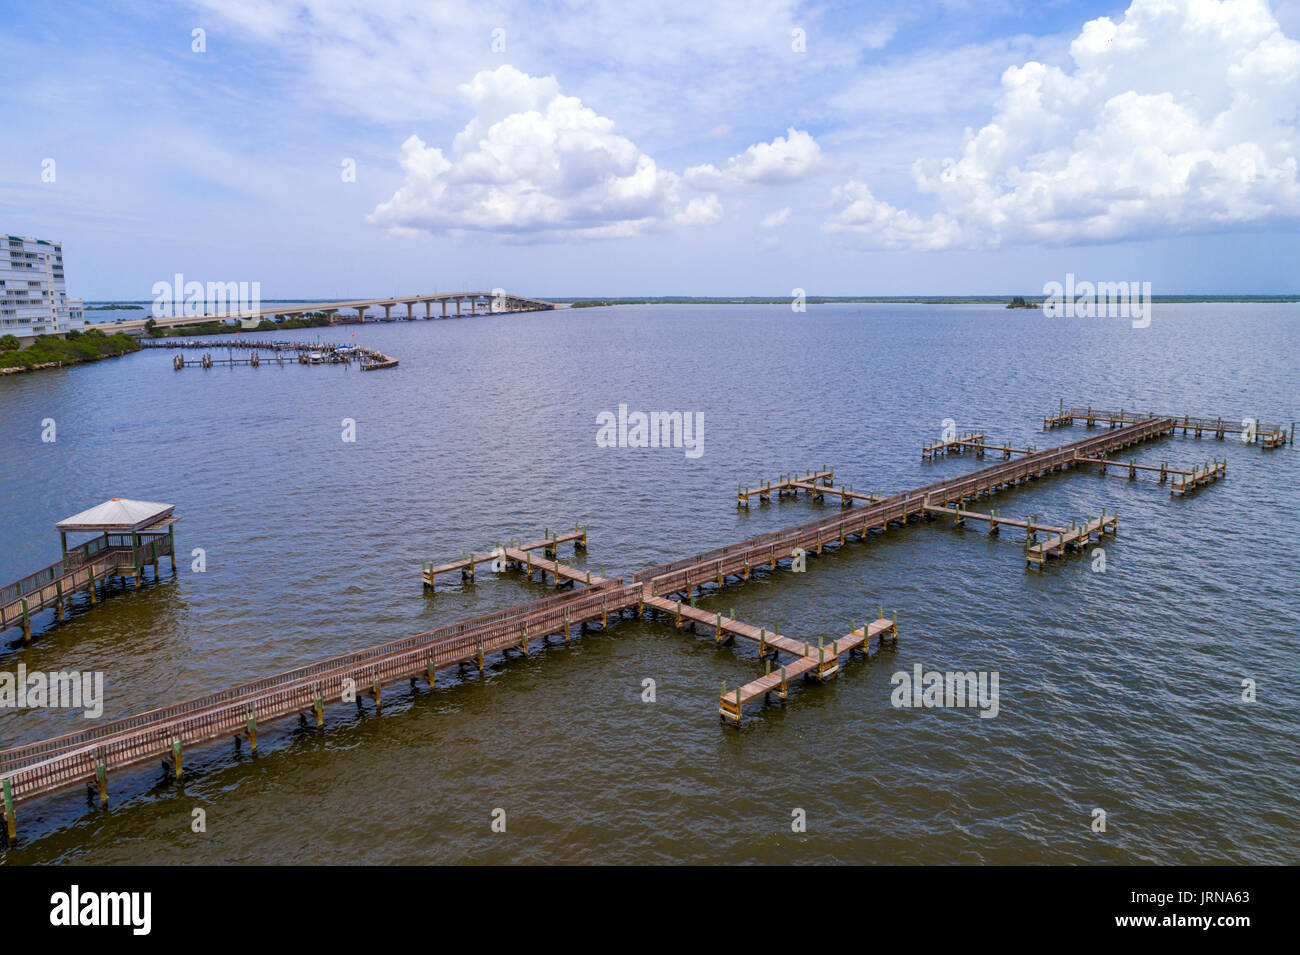 Florida,Titusville,Indian River water,Space View Park Pier,bridge,A Max Brewer Memorial Parkway,aerial overhead bird's eye view above,visitors travel Stock Photo